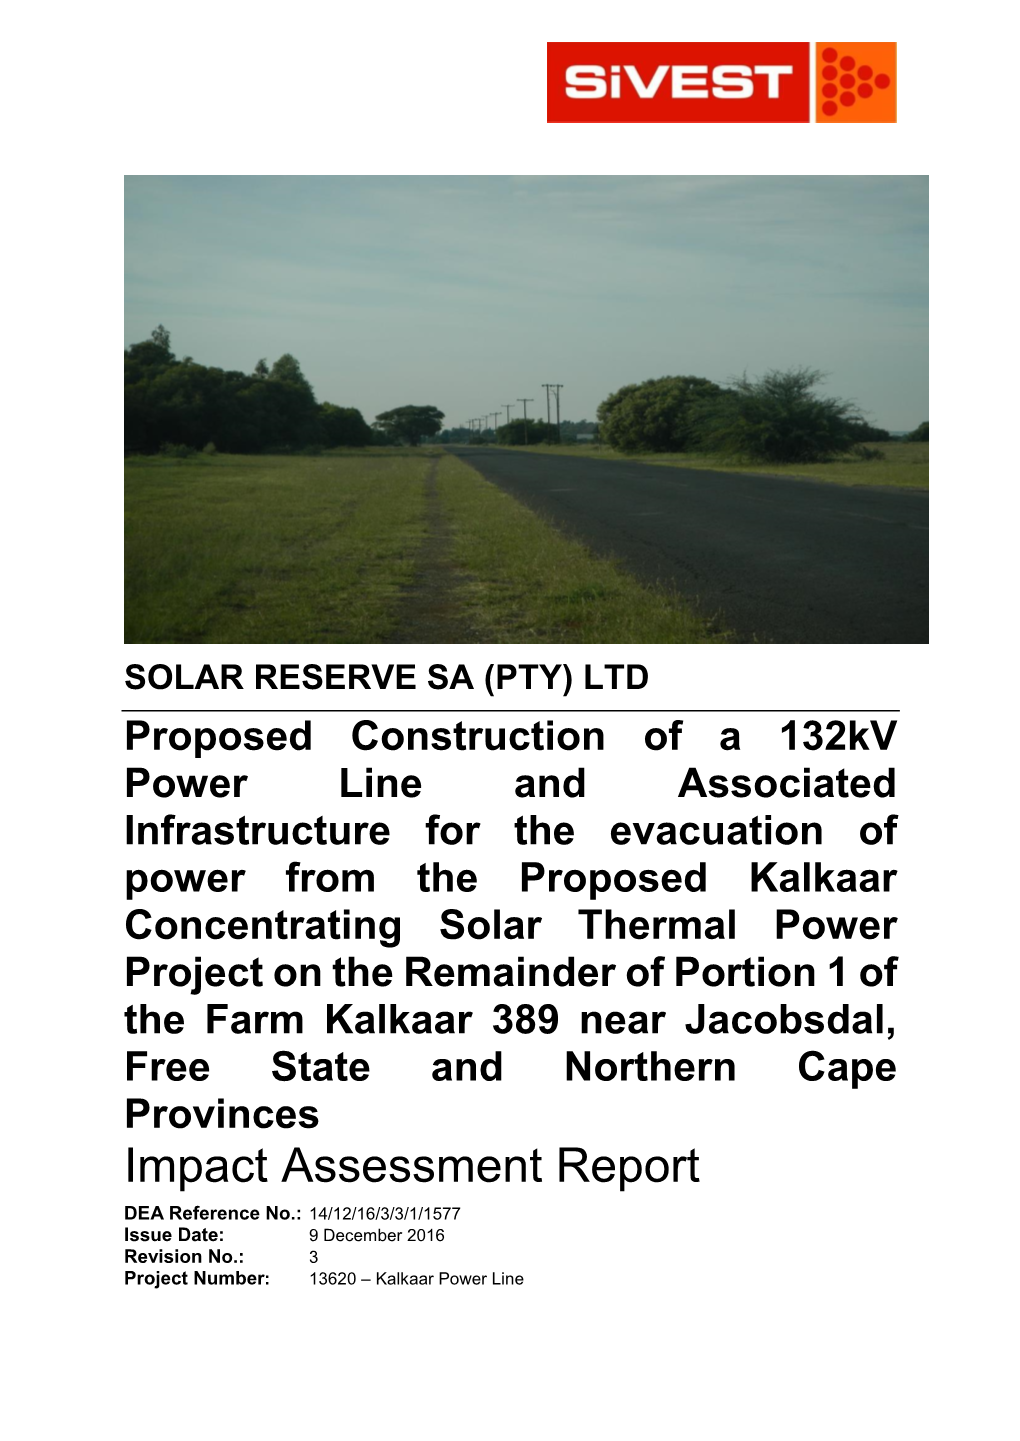 Impact Assessment Report DEA Reference No.: 14/12/16/3/3/1/1577 Issue Date: 9 December 2016 Revision No.: 3 Project Number: 13620 – Kalkaar Power Line